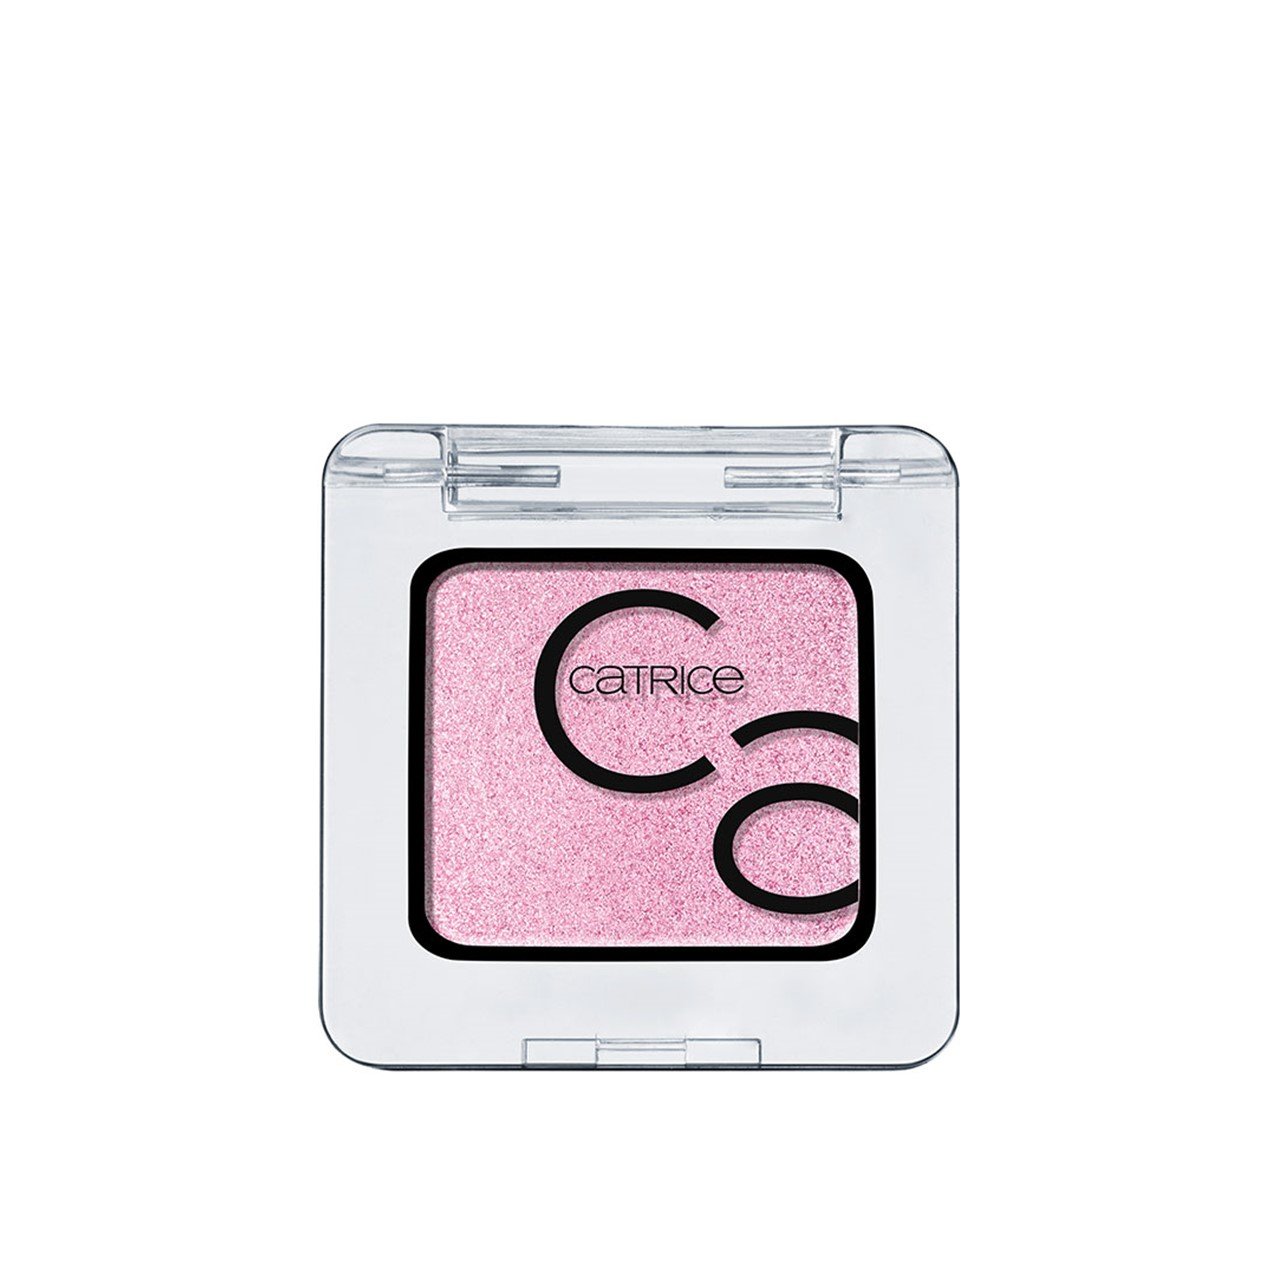 Catrice Art Couleurs Eyeshadow 160 Silicon Violet 2g (0.07oz)